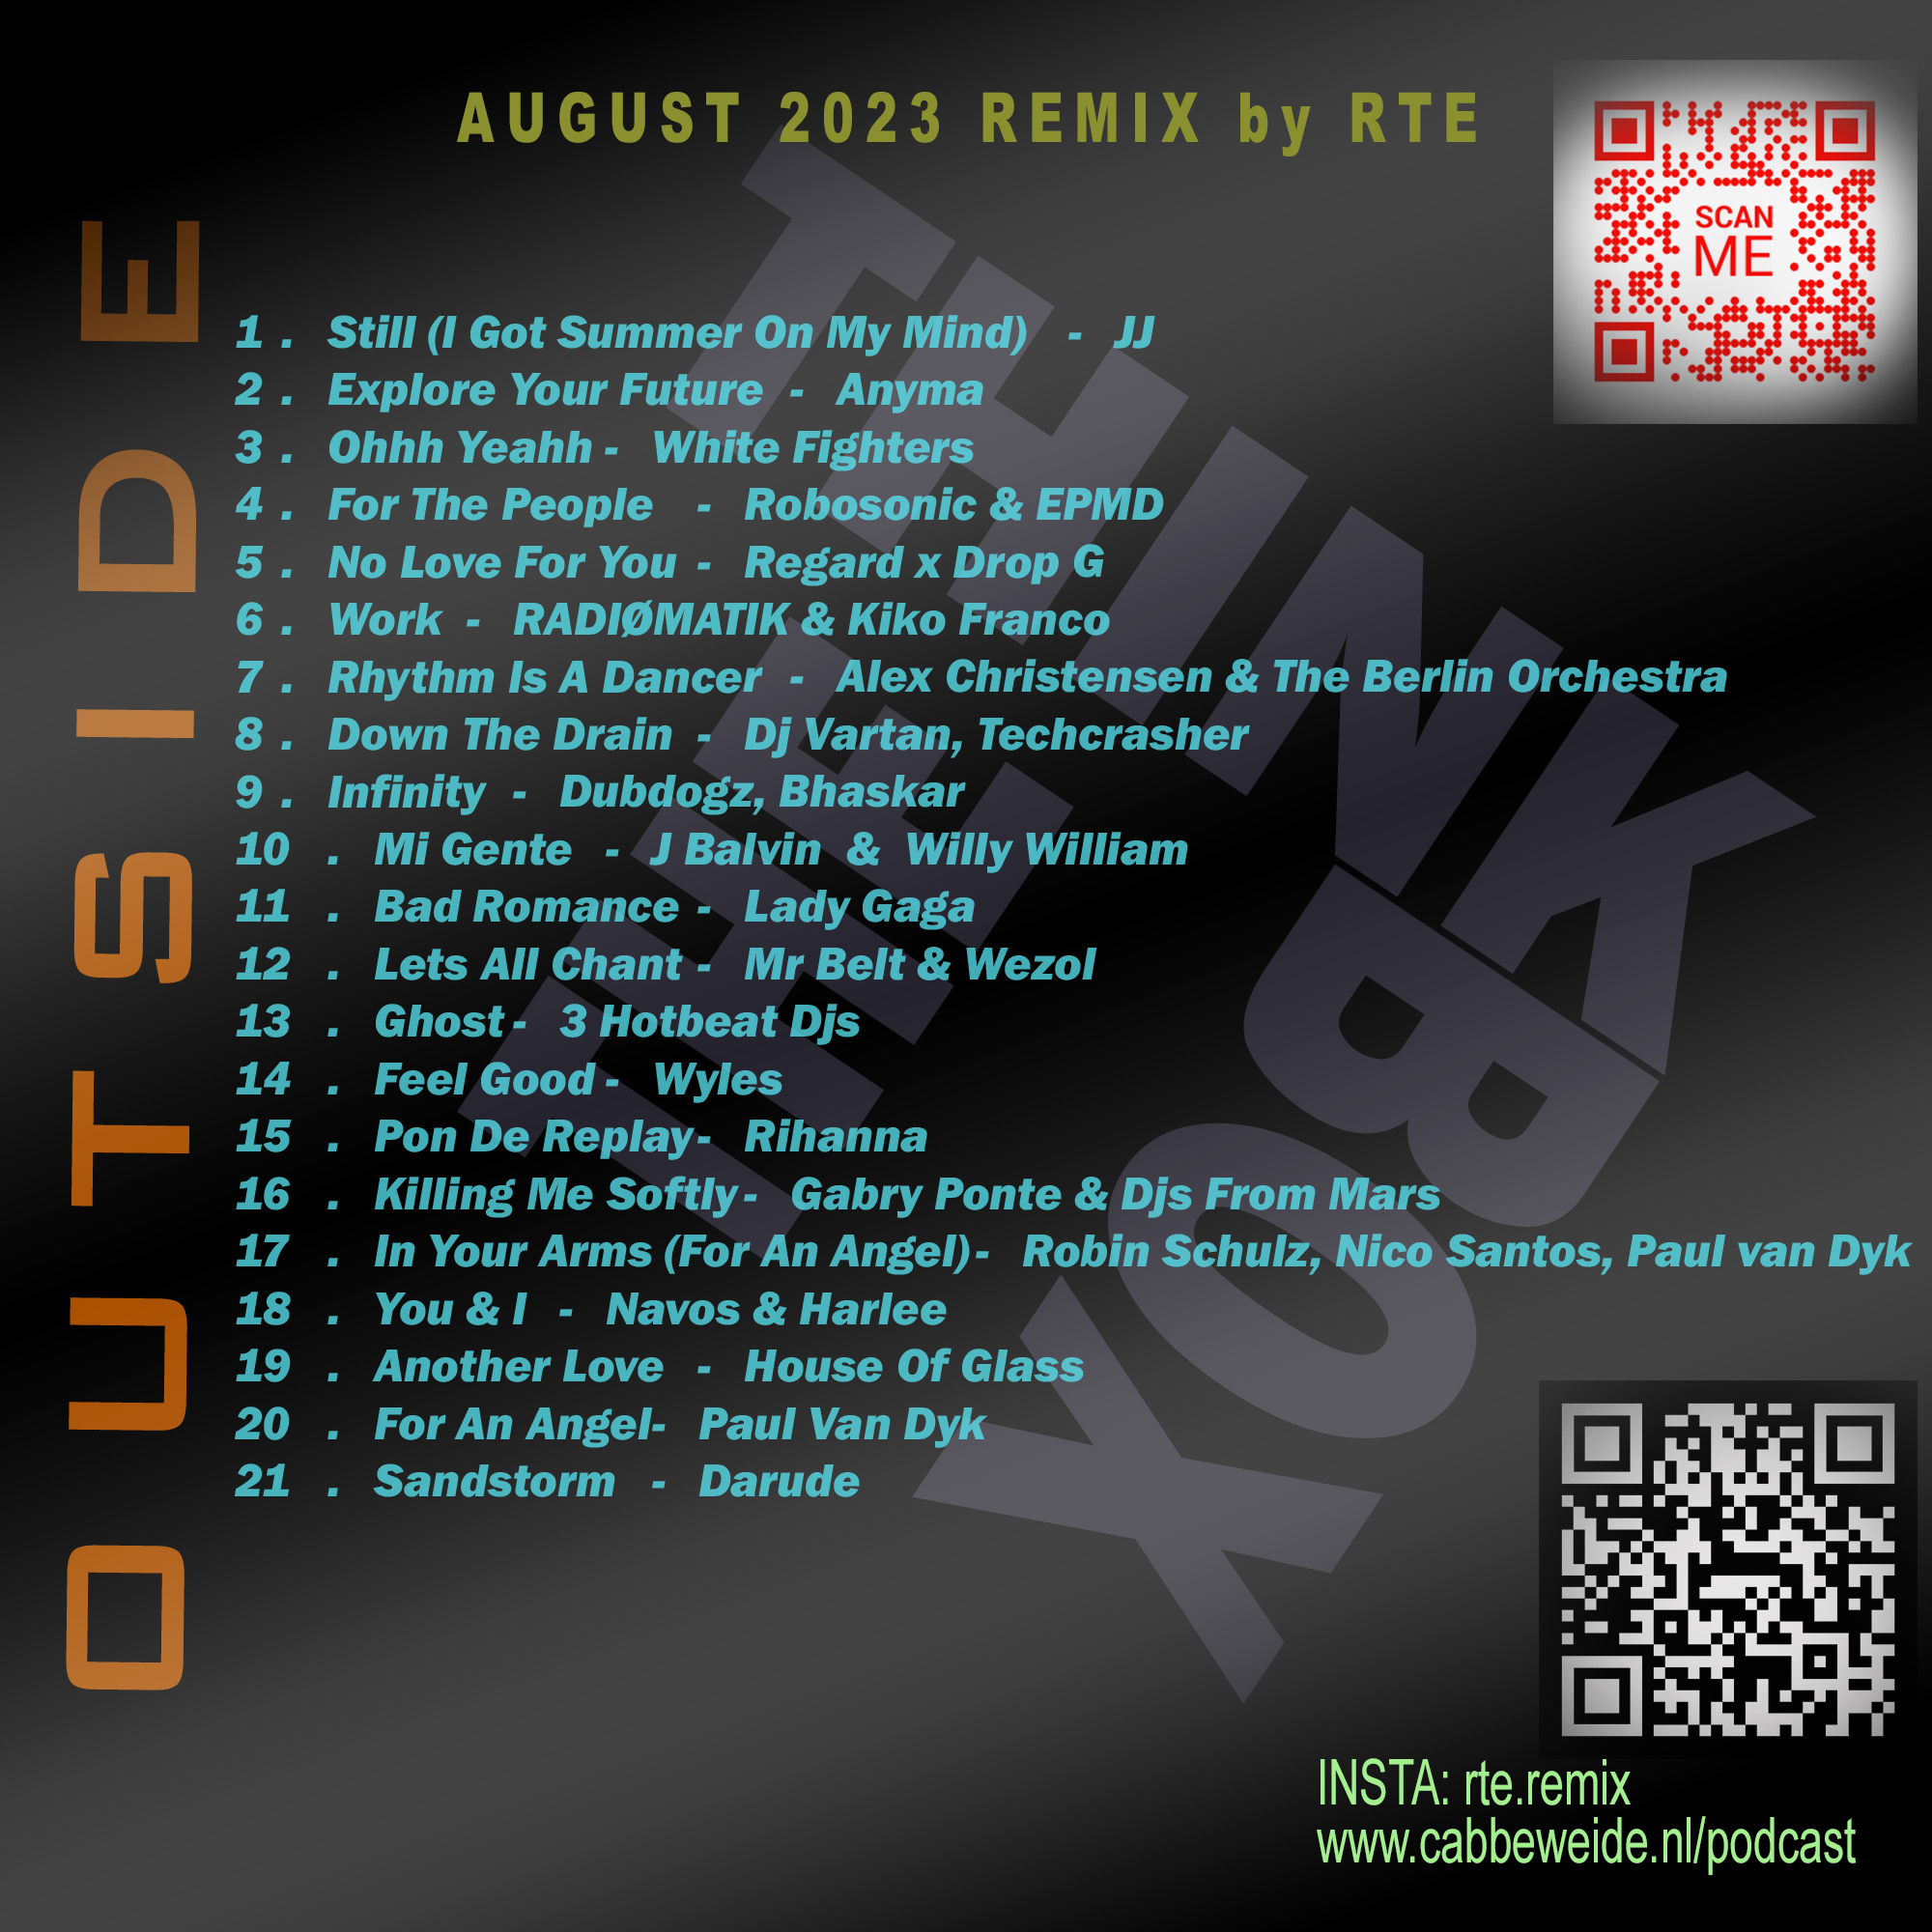 AUGUST 2023 REMIX by RTE